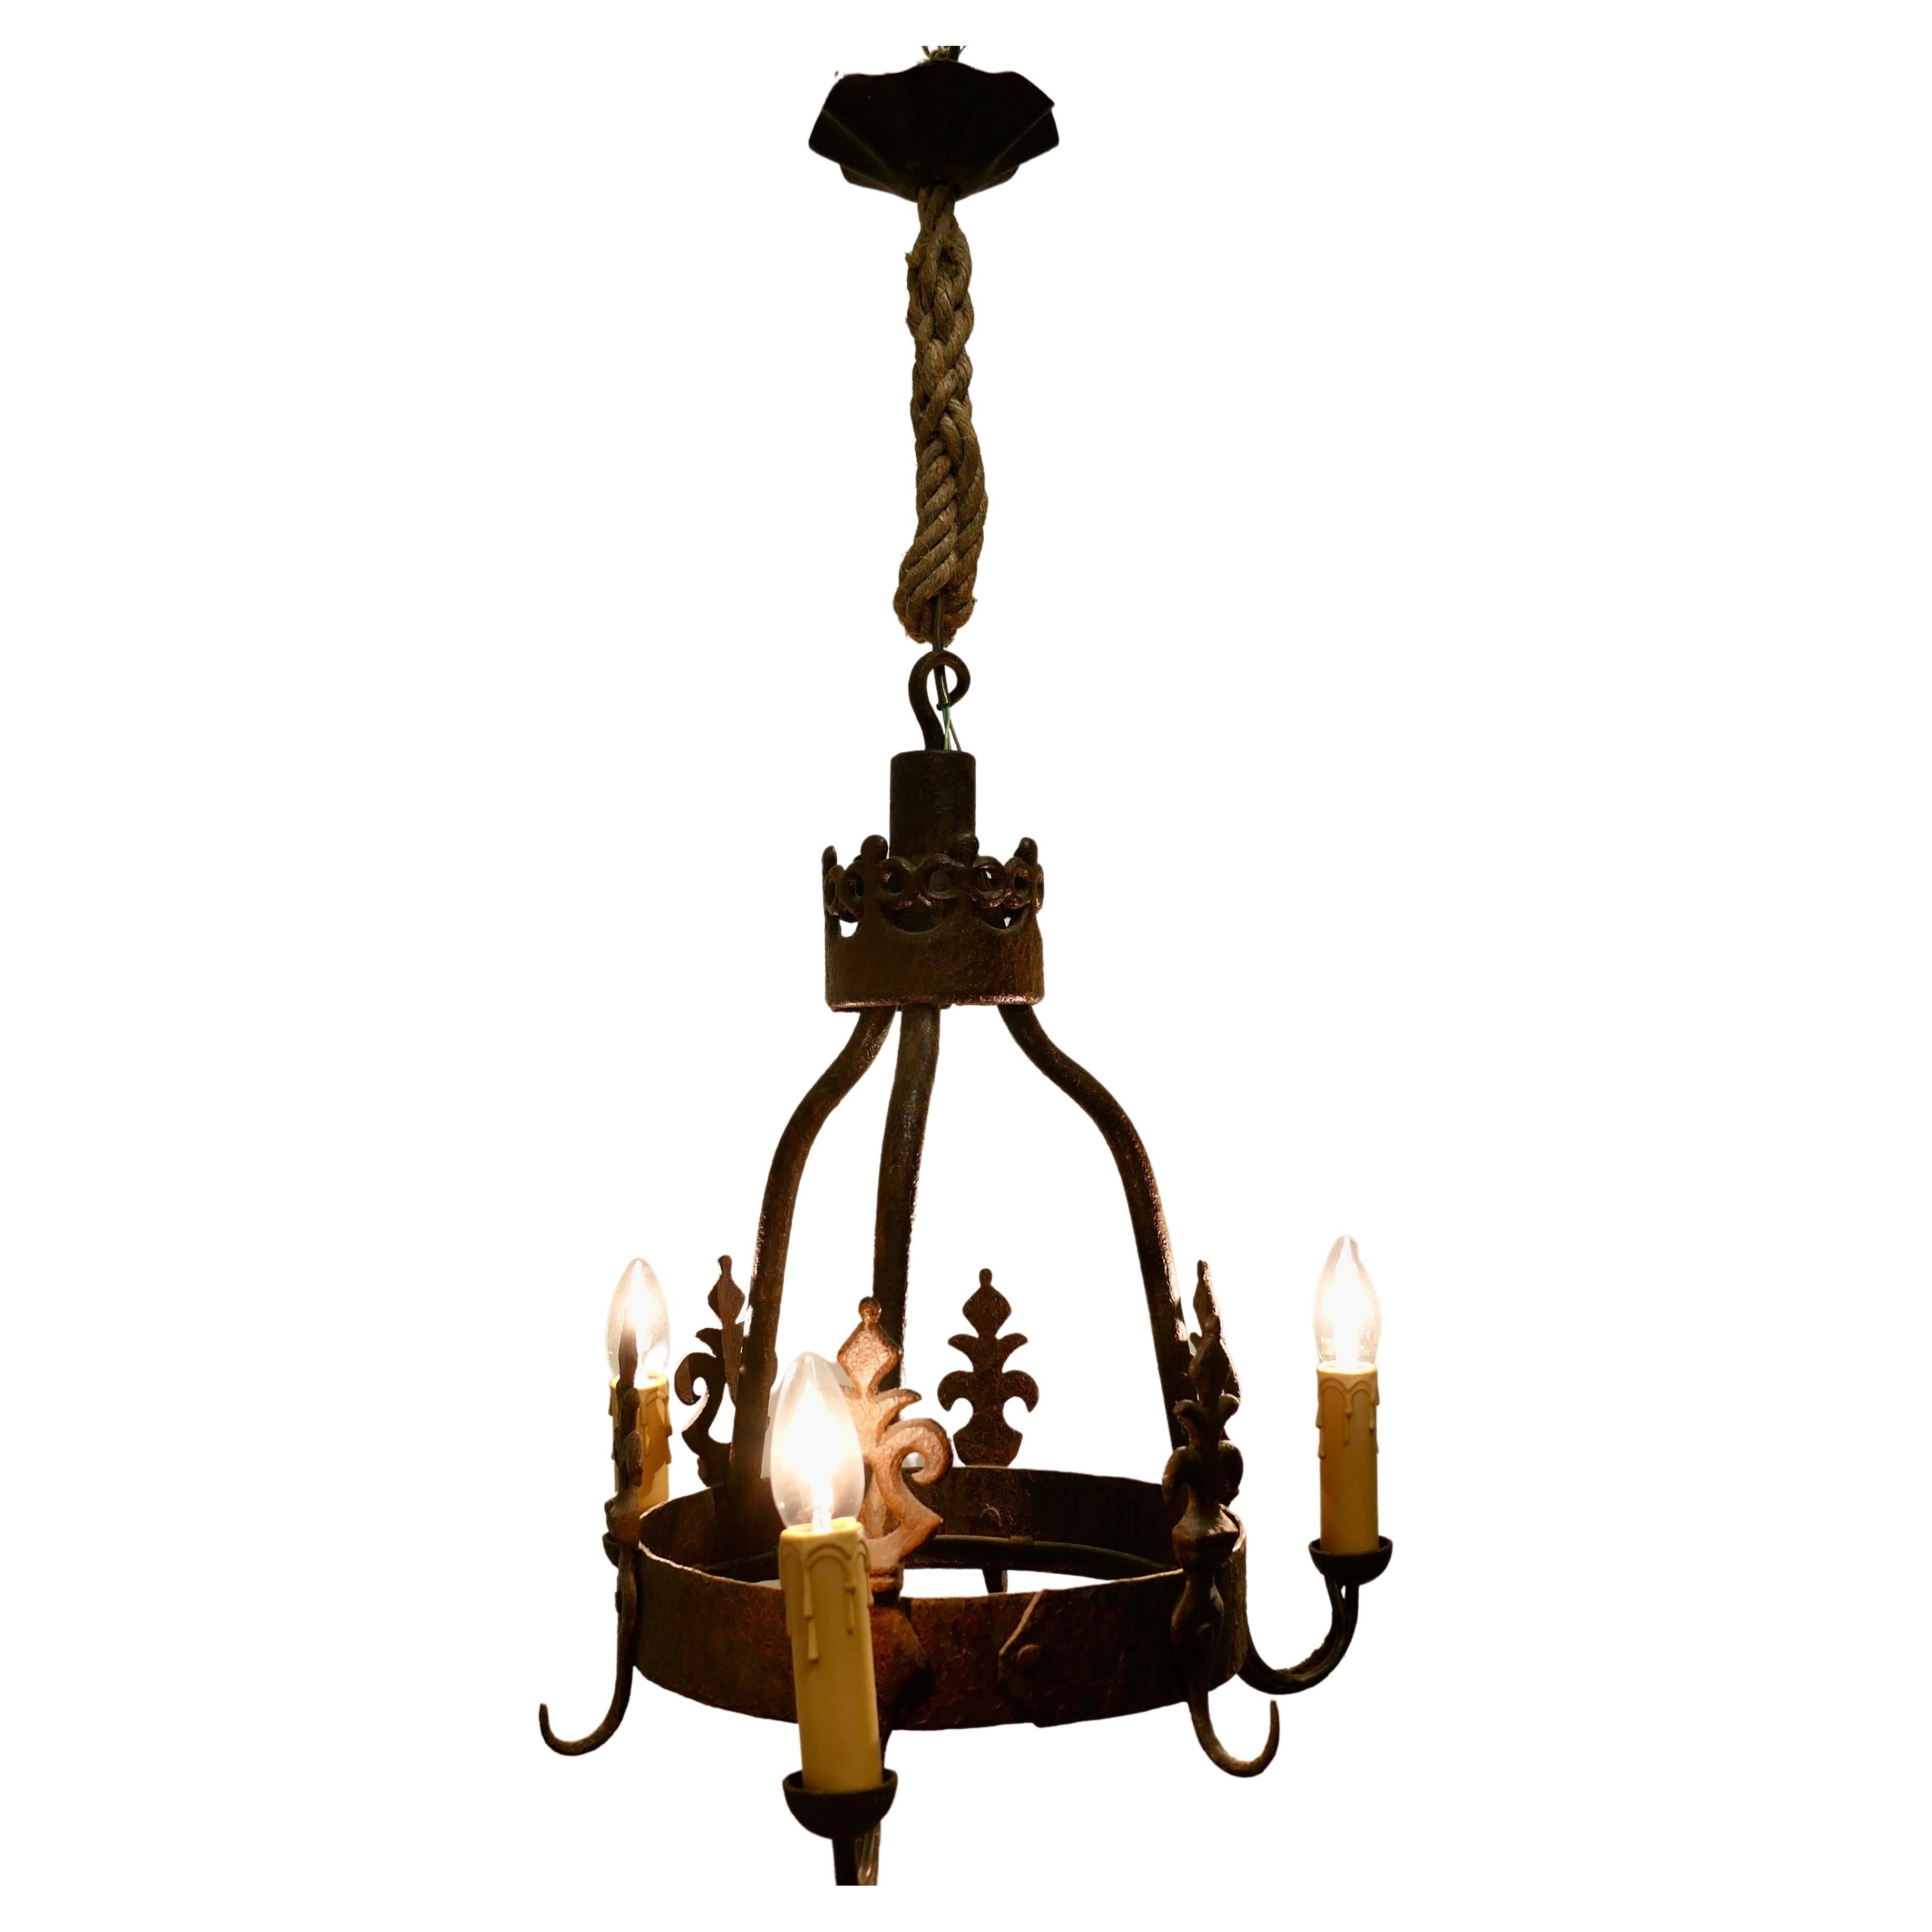 Heavy French Blacksmith Made Iron Game Hanger, made as a Light Fitting